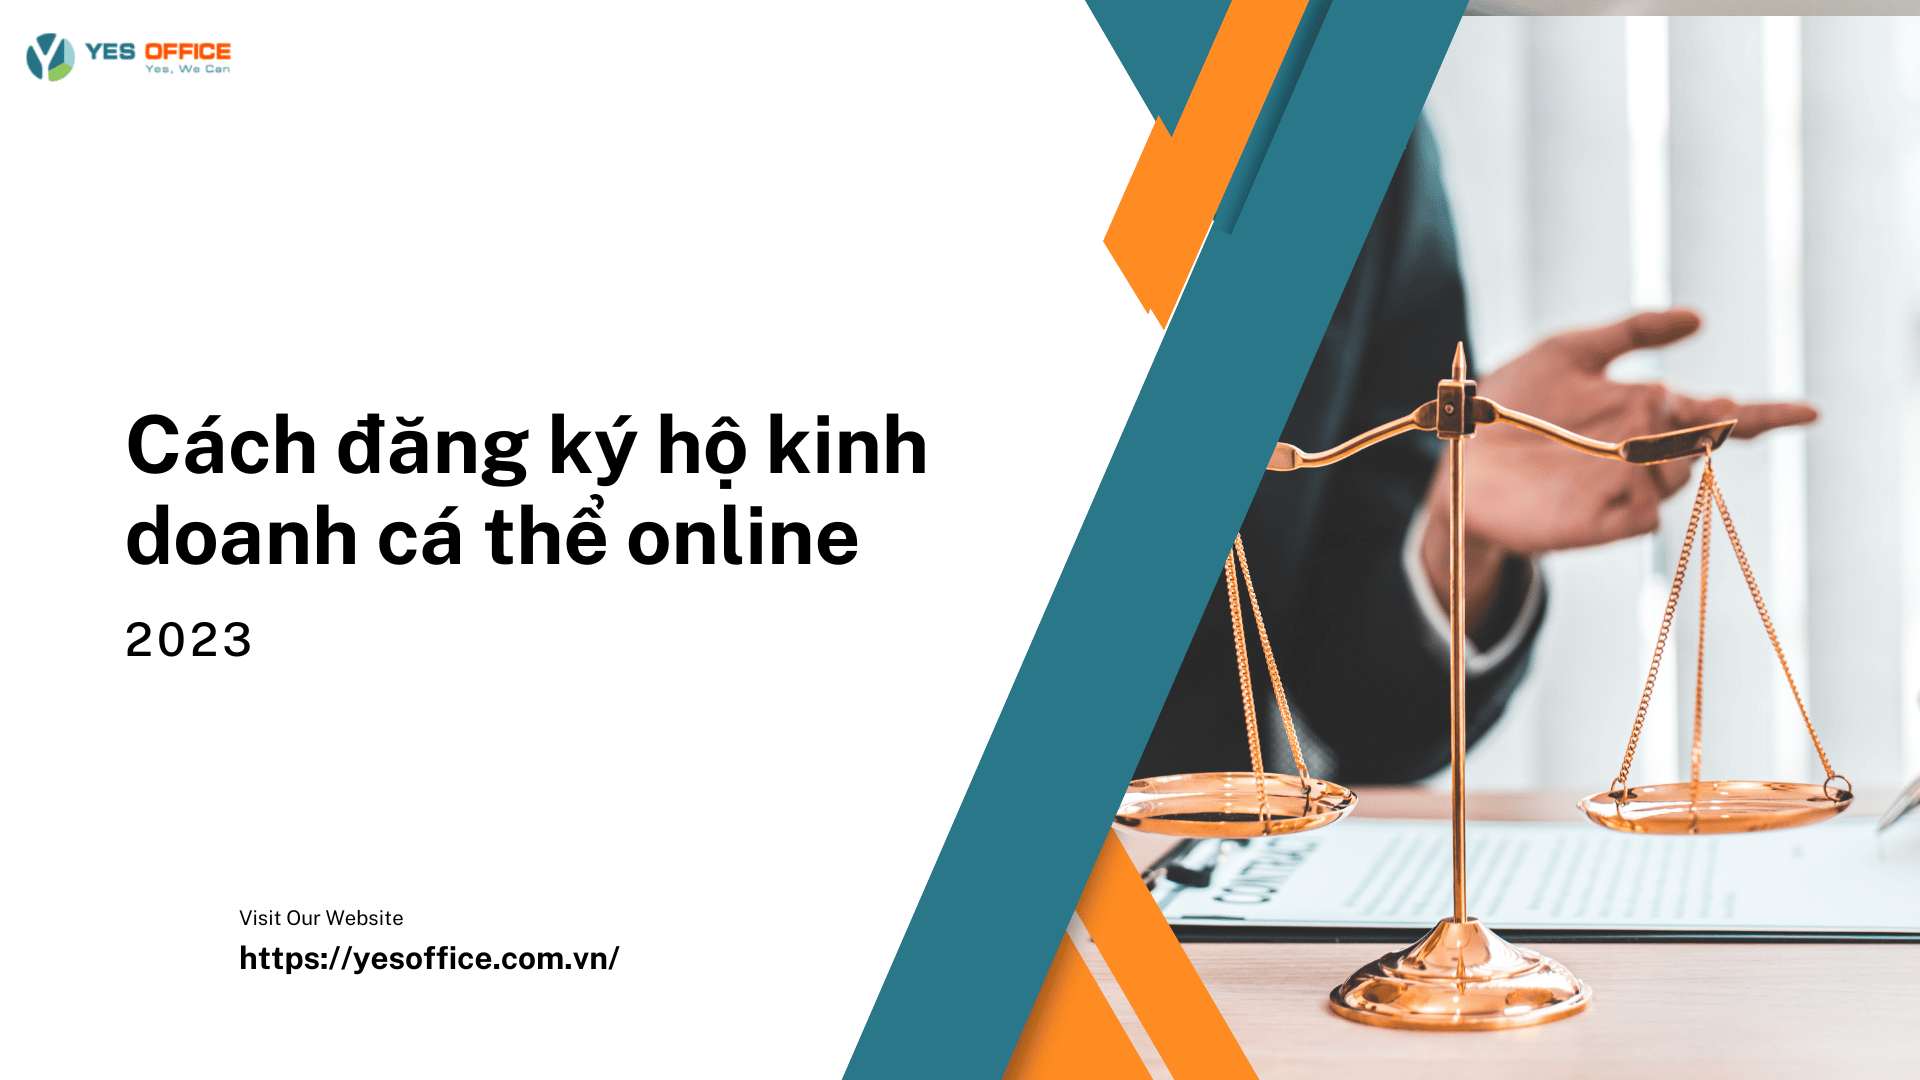 Cach Dang Ky Ho Kinh Doanh Ca The Online